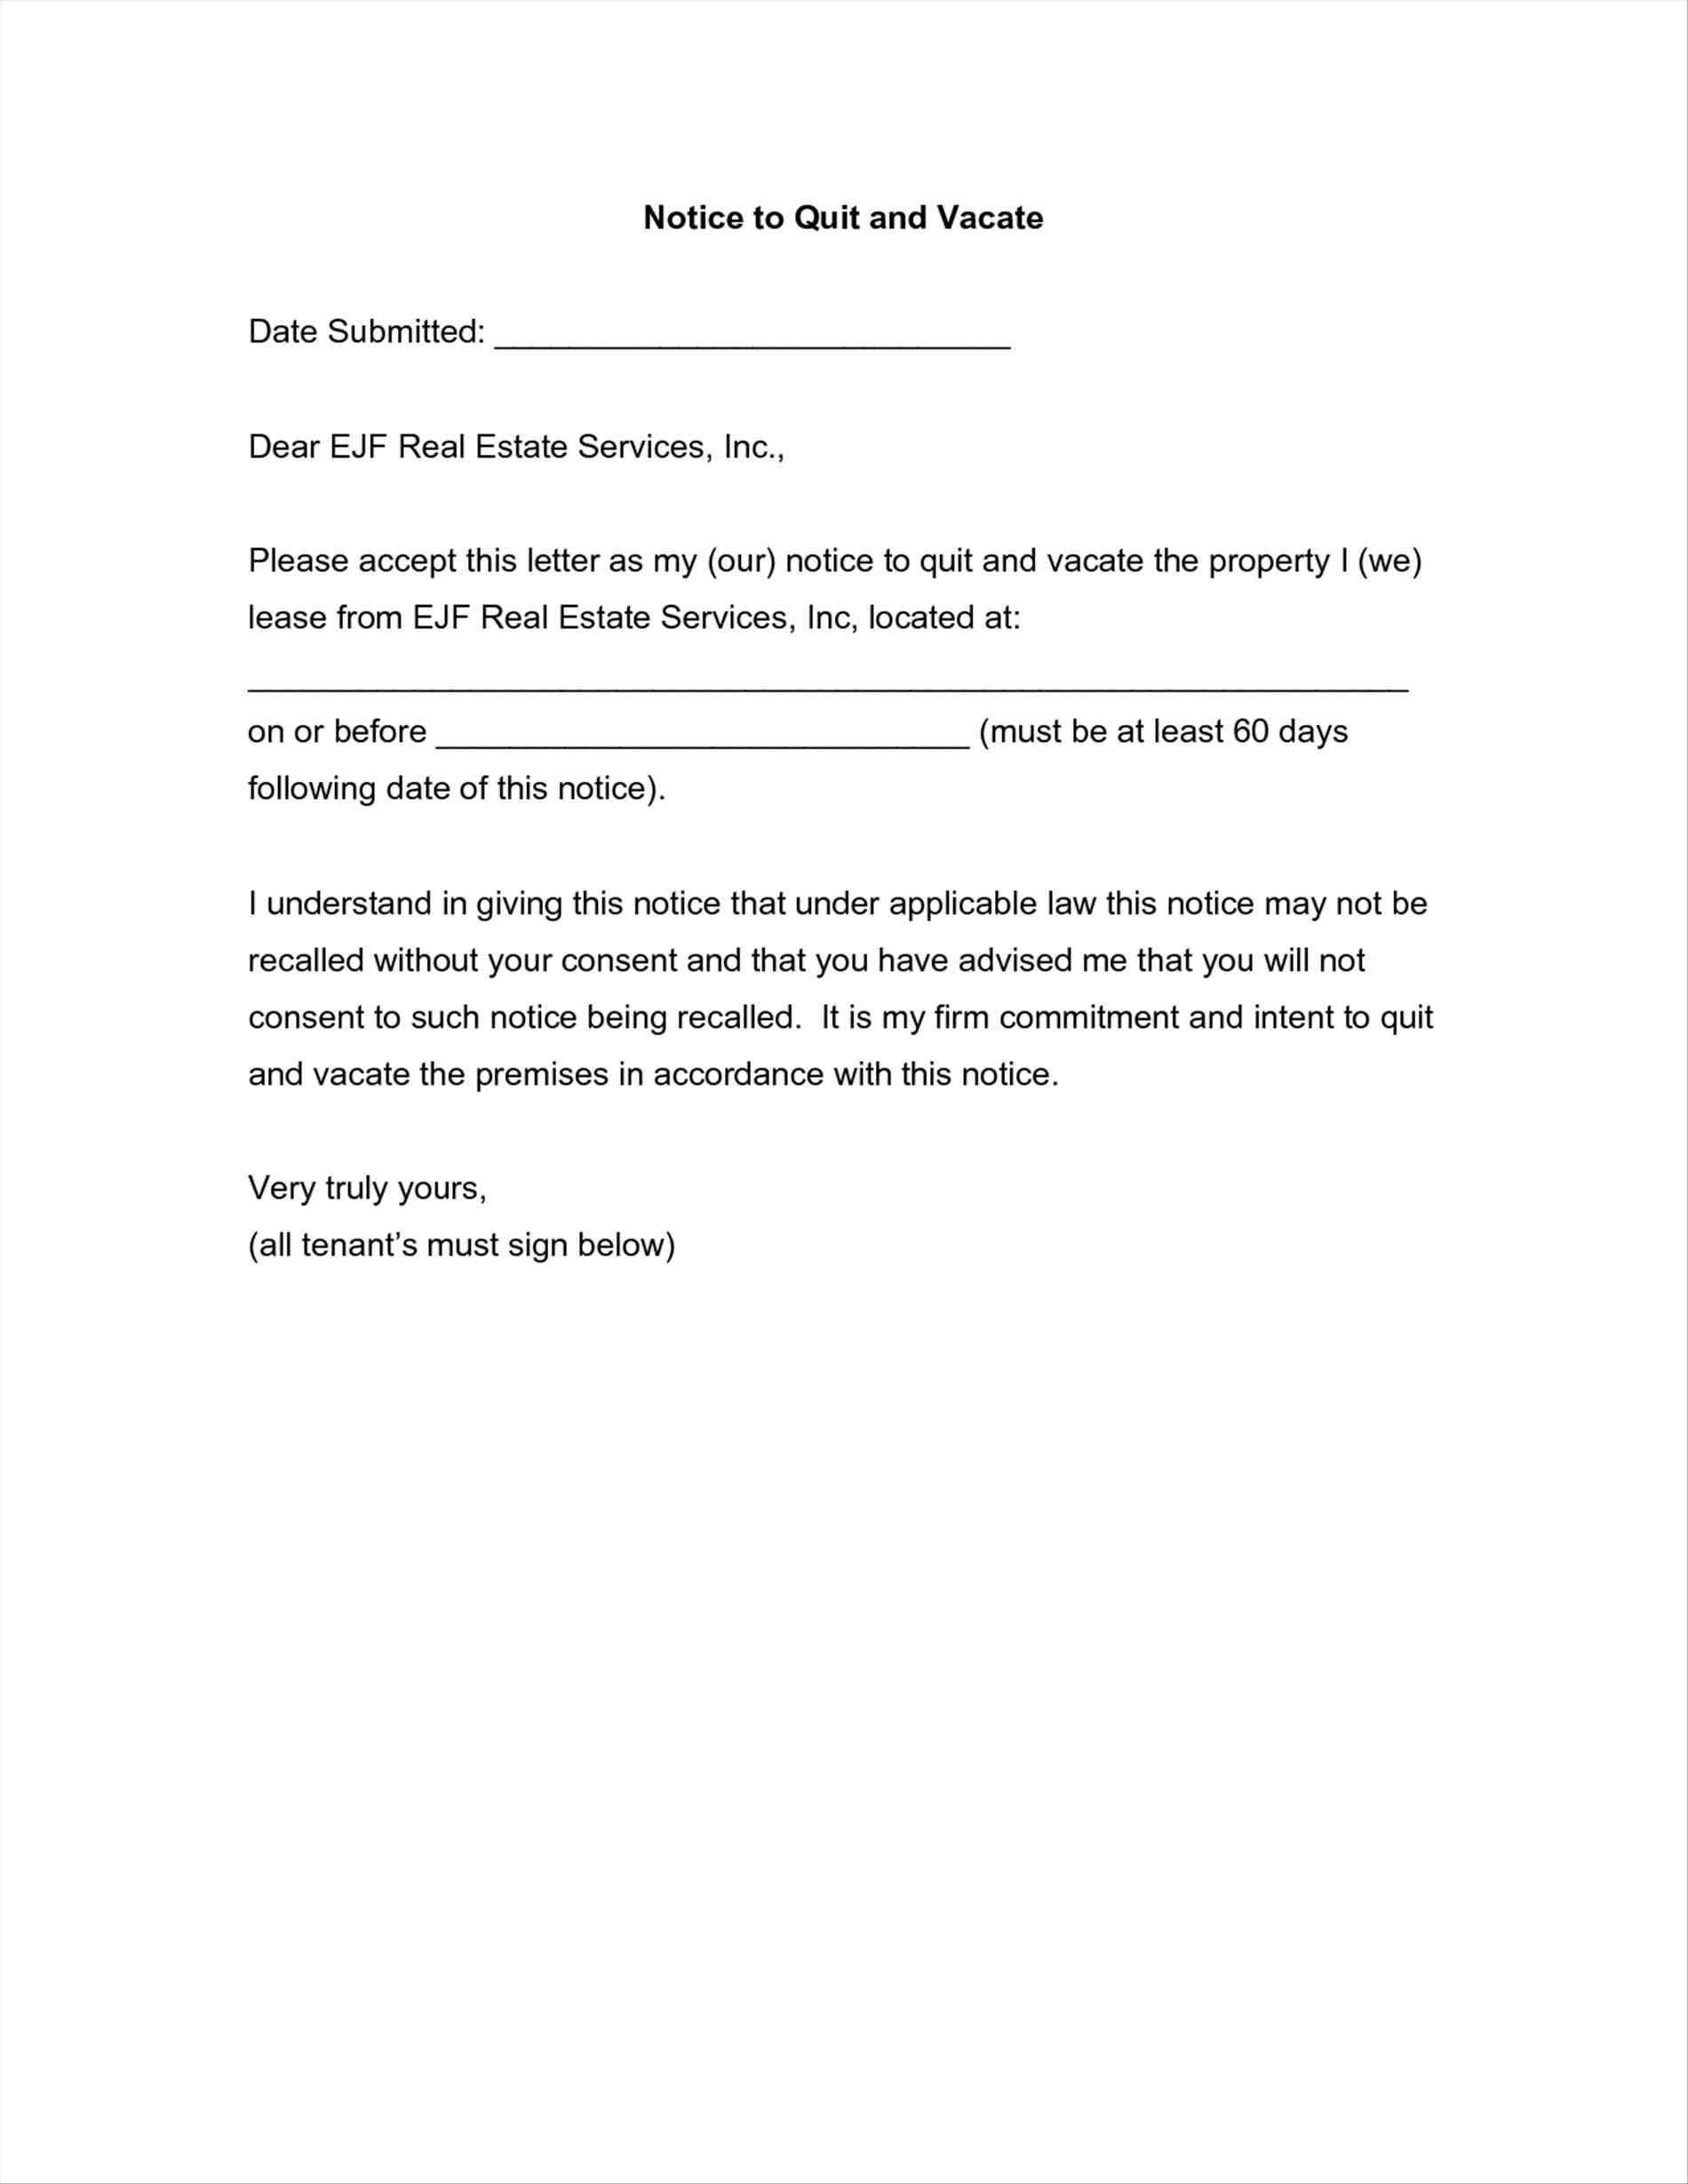 Intent to Vacate Letter Template - 60 Day Notice Apartment Template